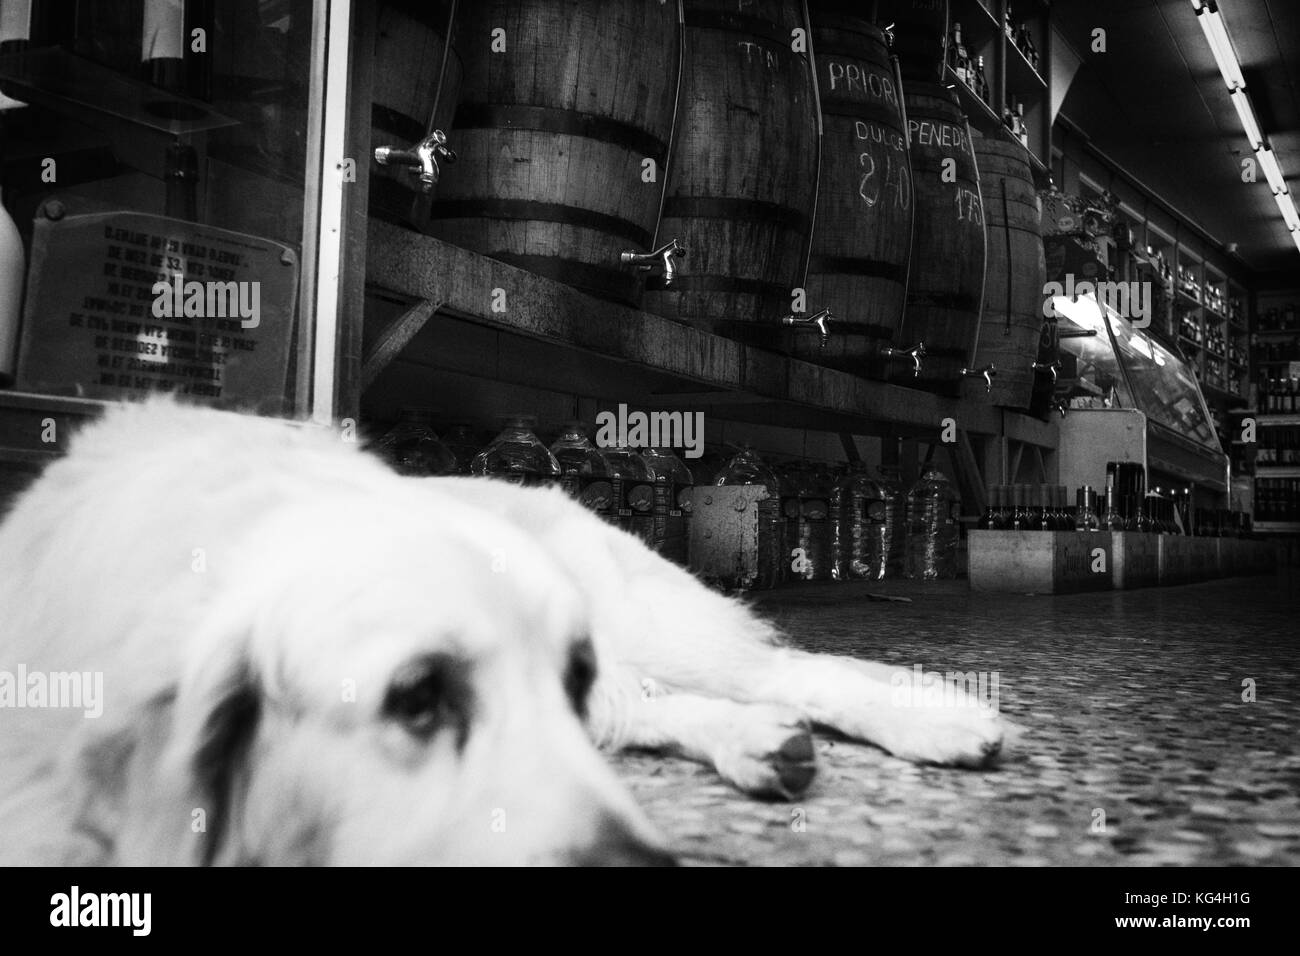 A dog lays on the entrance of the wine an spirit shop Vilanova that stands on the street Sant Antoni Abad of Barcelona, Spain. Date: 15/09/2015. Photo: Xabier Mikel Laburu. Wines and Spirits Vilanova was founded as a small supermarket in 1950 by the father of Isidre Vilanova, who is the owner of the shop. To survive the changes in the consumption patterns he switched from a general food supermarket to a shop specialized in wines and spirits. Isidre will pass on the business to his son who will continue with the family business. Stock Photo